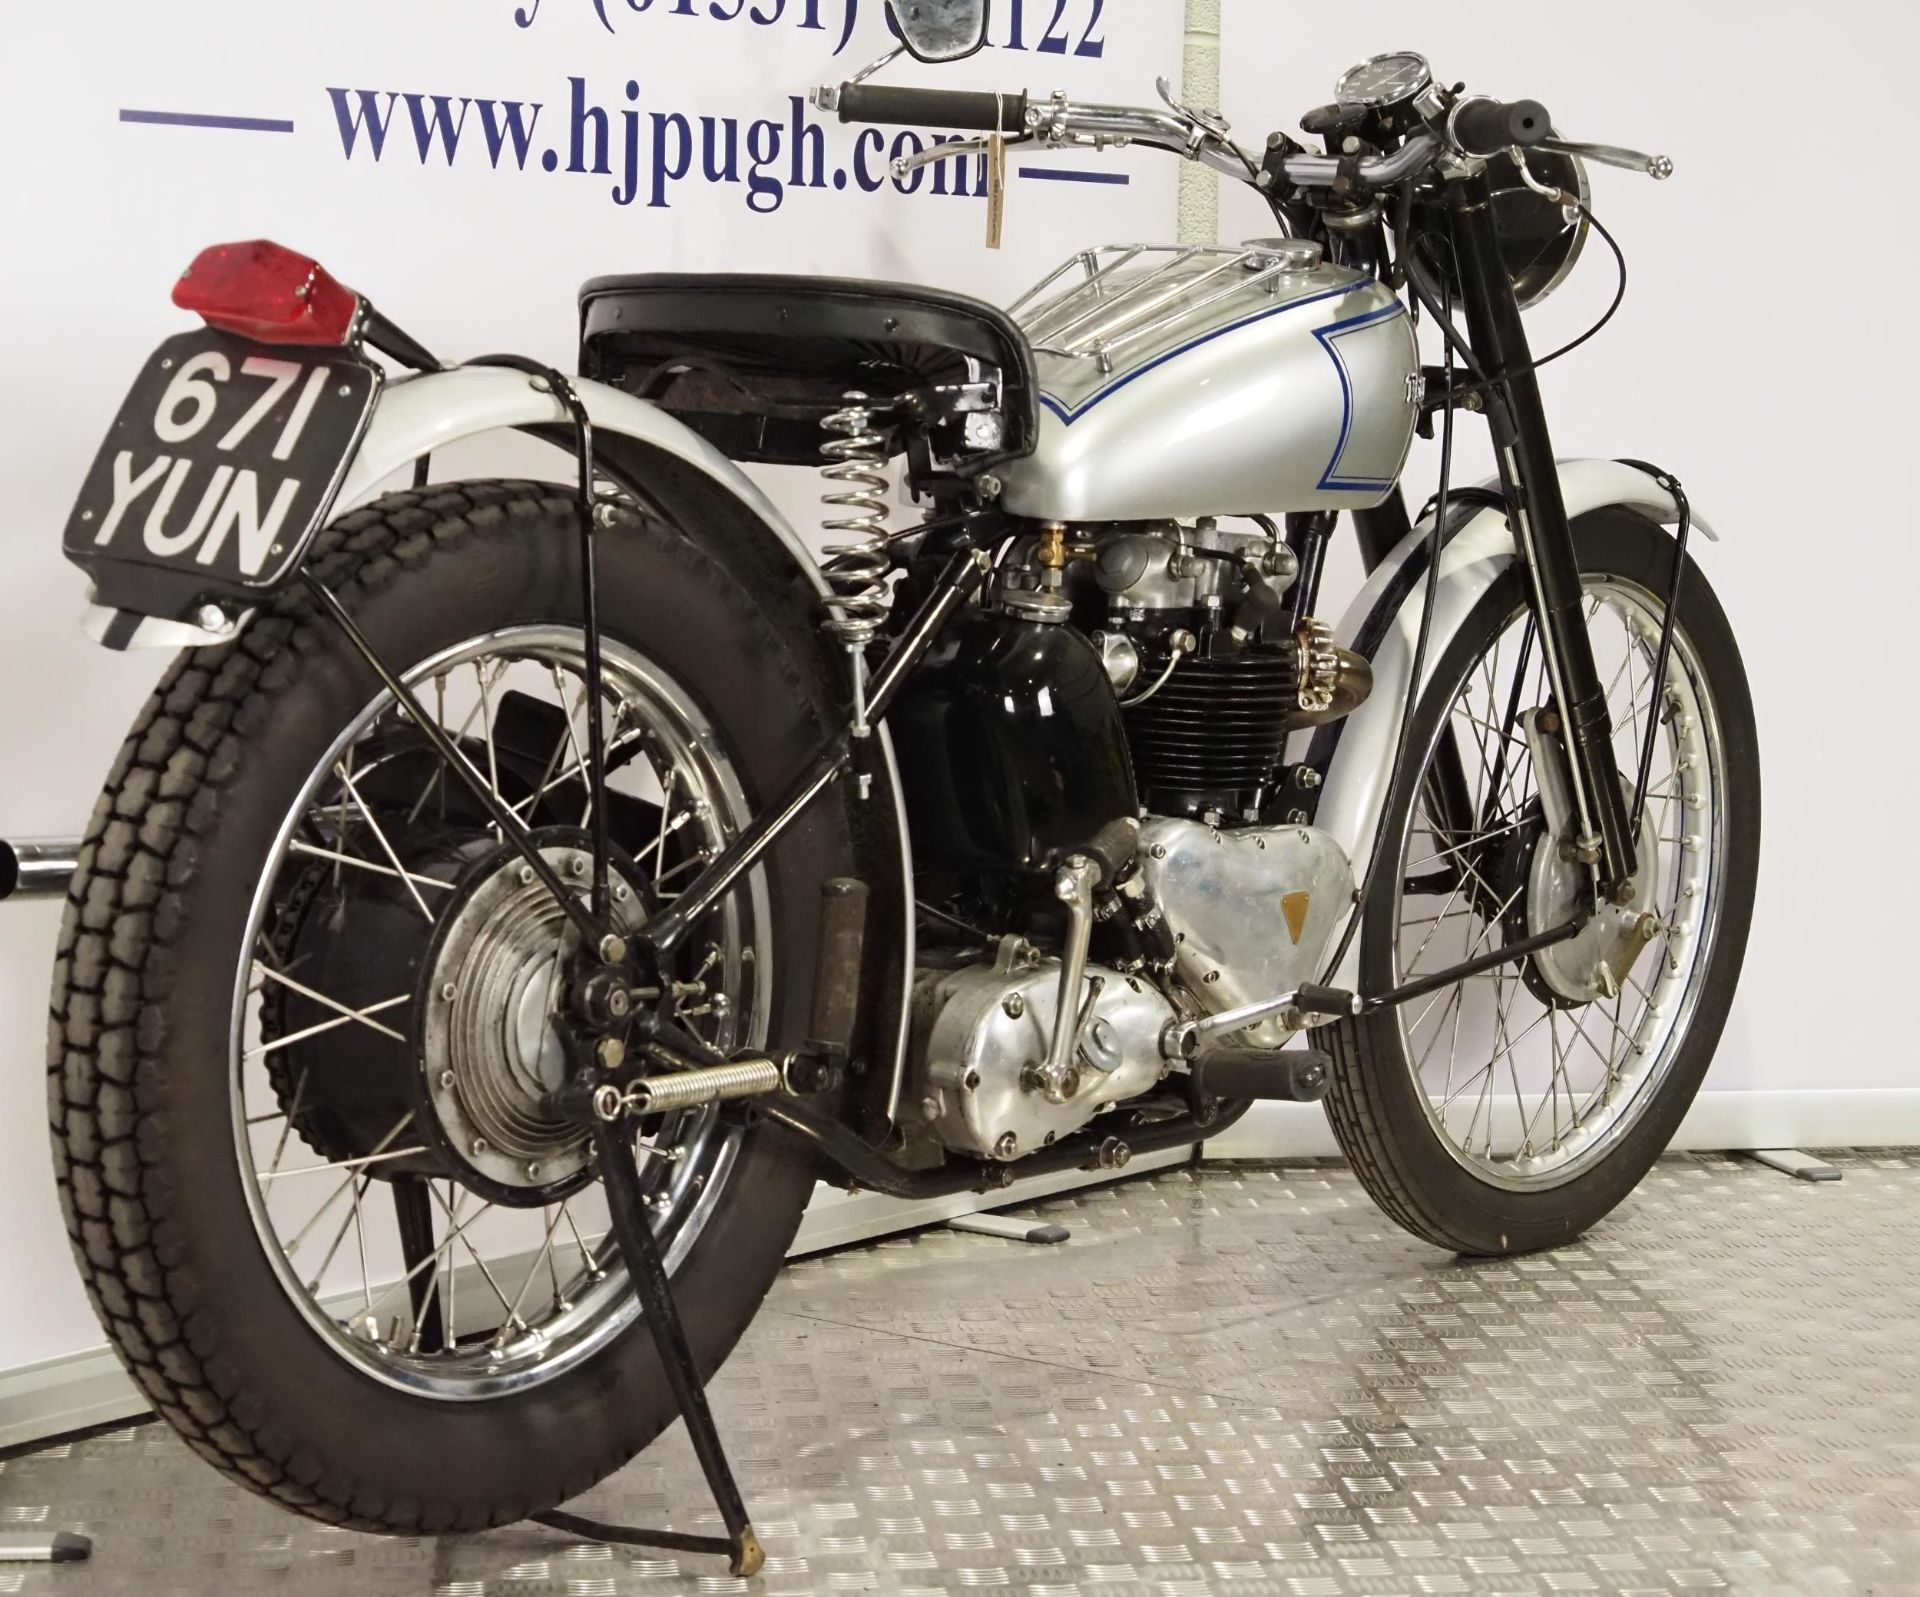 Triumph Trophy 6T motorcycle. 1953. 650cc. Frame No. 39335 Engine No. 6T32170 Rims and rides. - Image 3 of 6